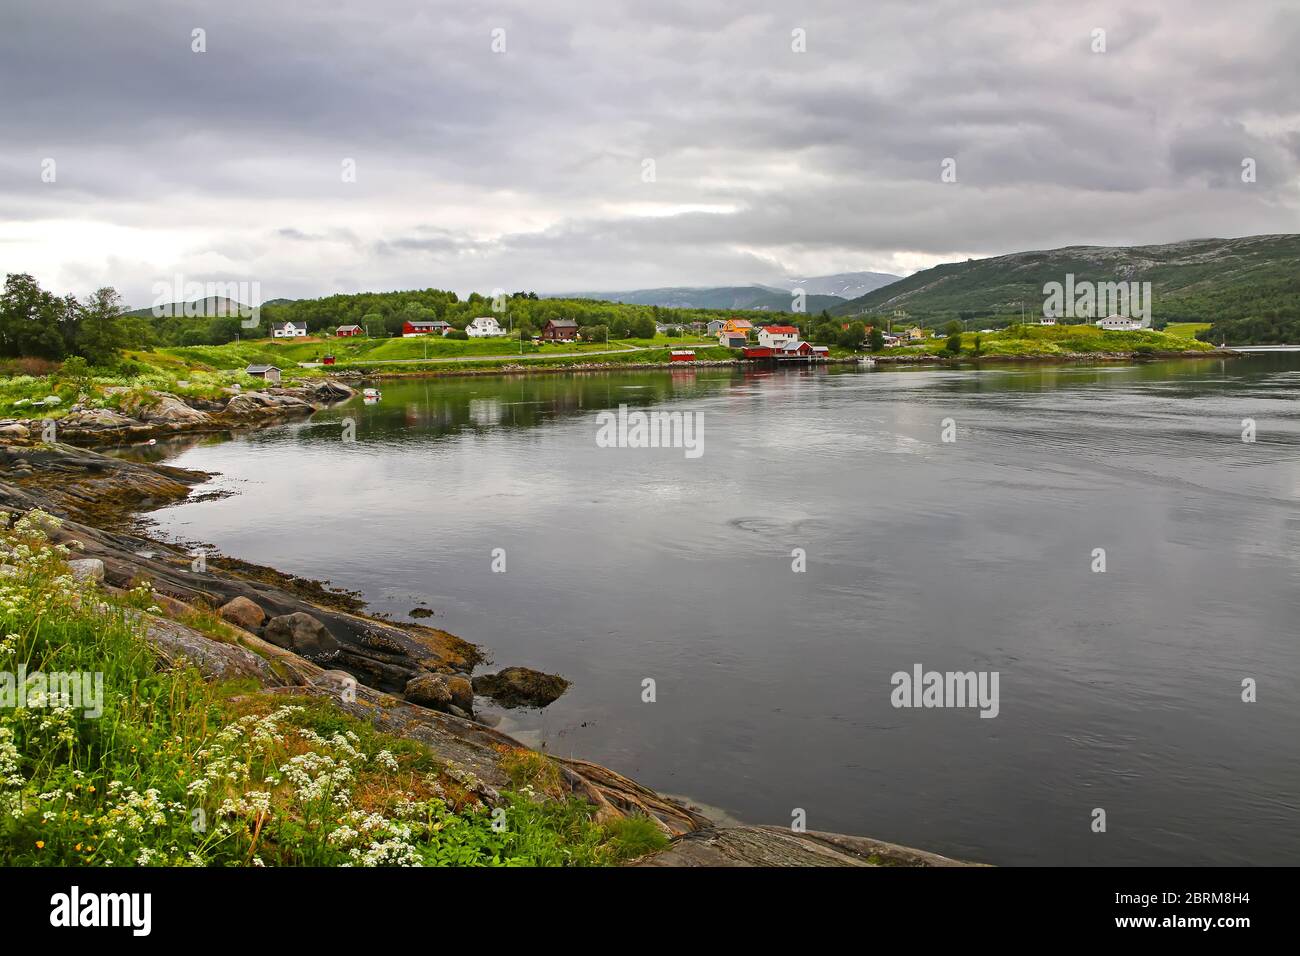 Beautiful landscape along with waters edge, village, church & mountains in the background, Saltstraumen, Municipality of Bodo, Nordland county, Norway. Stock Photo